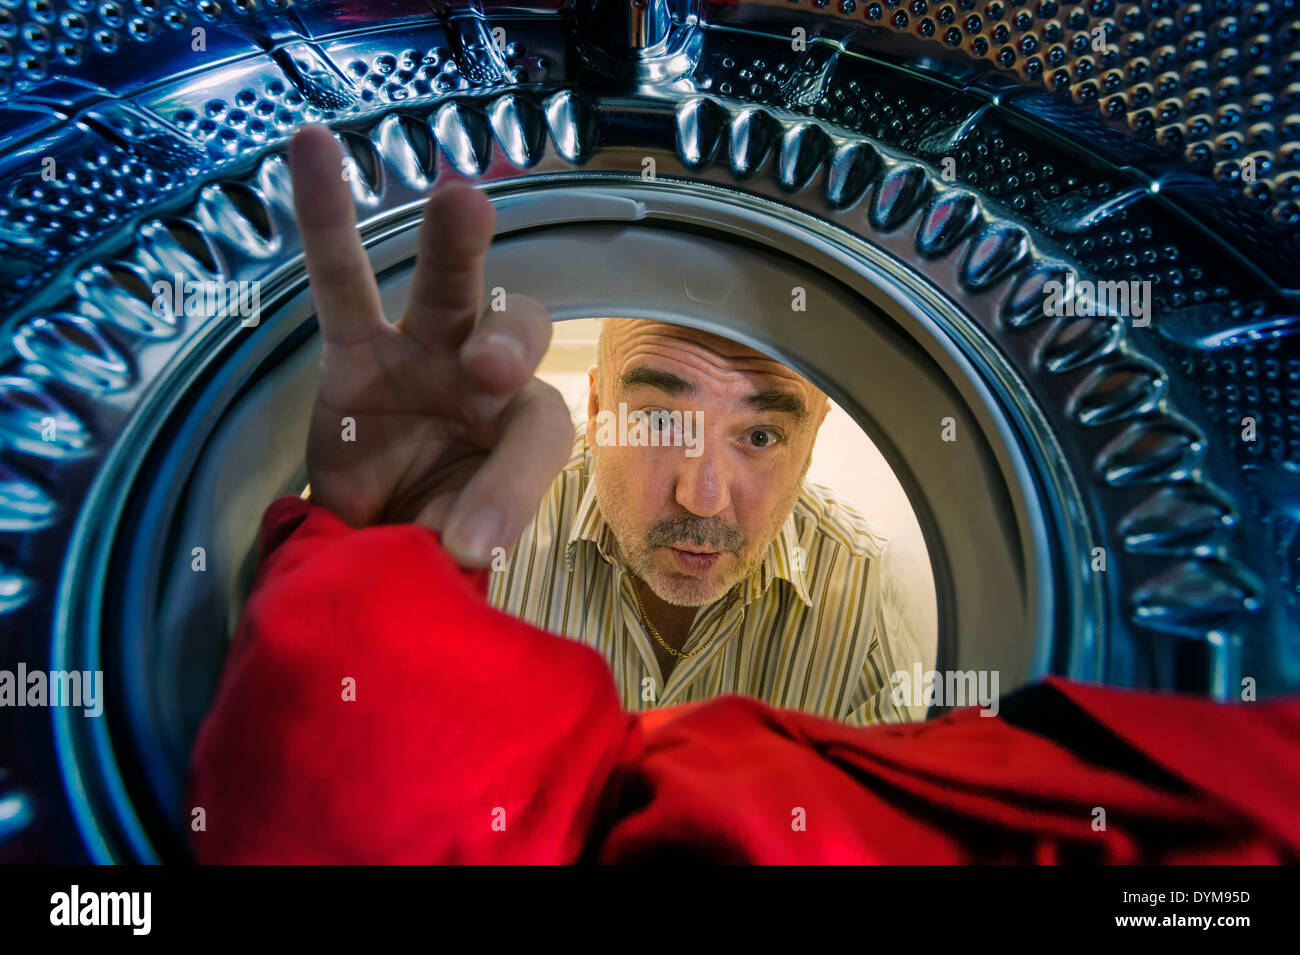 Man looking into a washing machine, grabbing a red cloth, Germany Stock Photo